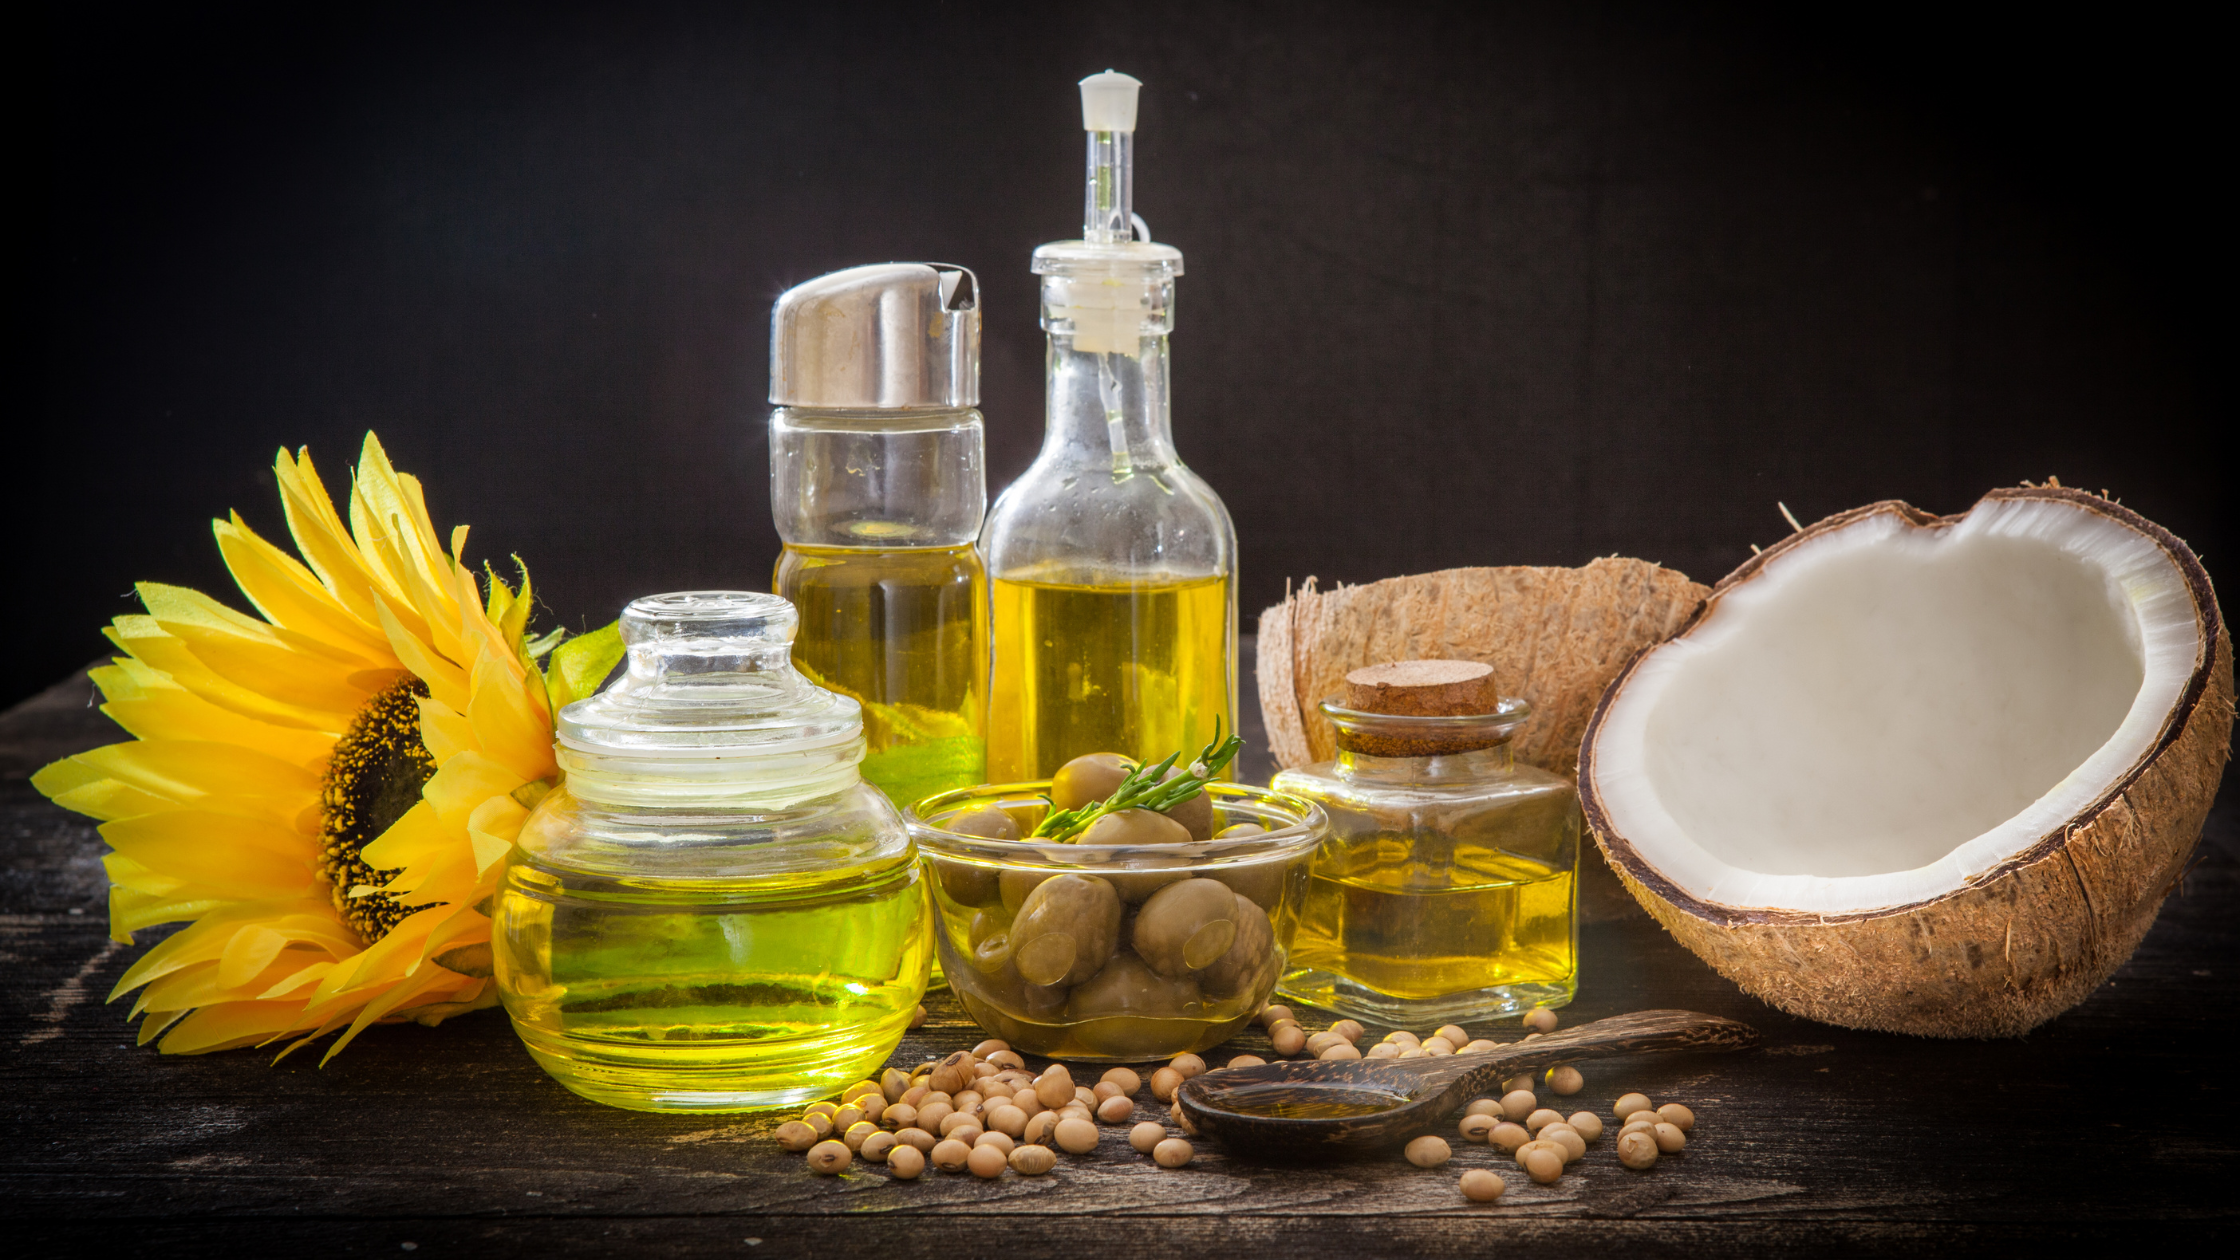 oil selection, nutrigenomics, monounsaturated fats, MUFA, polyunsaturated fats, PUFA, saturated fats, SF, personalized nutrition, health coaching, genetic variations, cardiovascular health, inflammation, cooking oils, optimal health